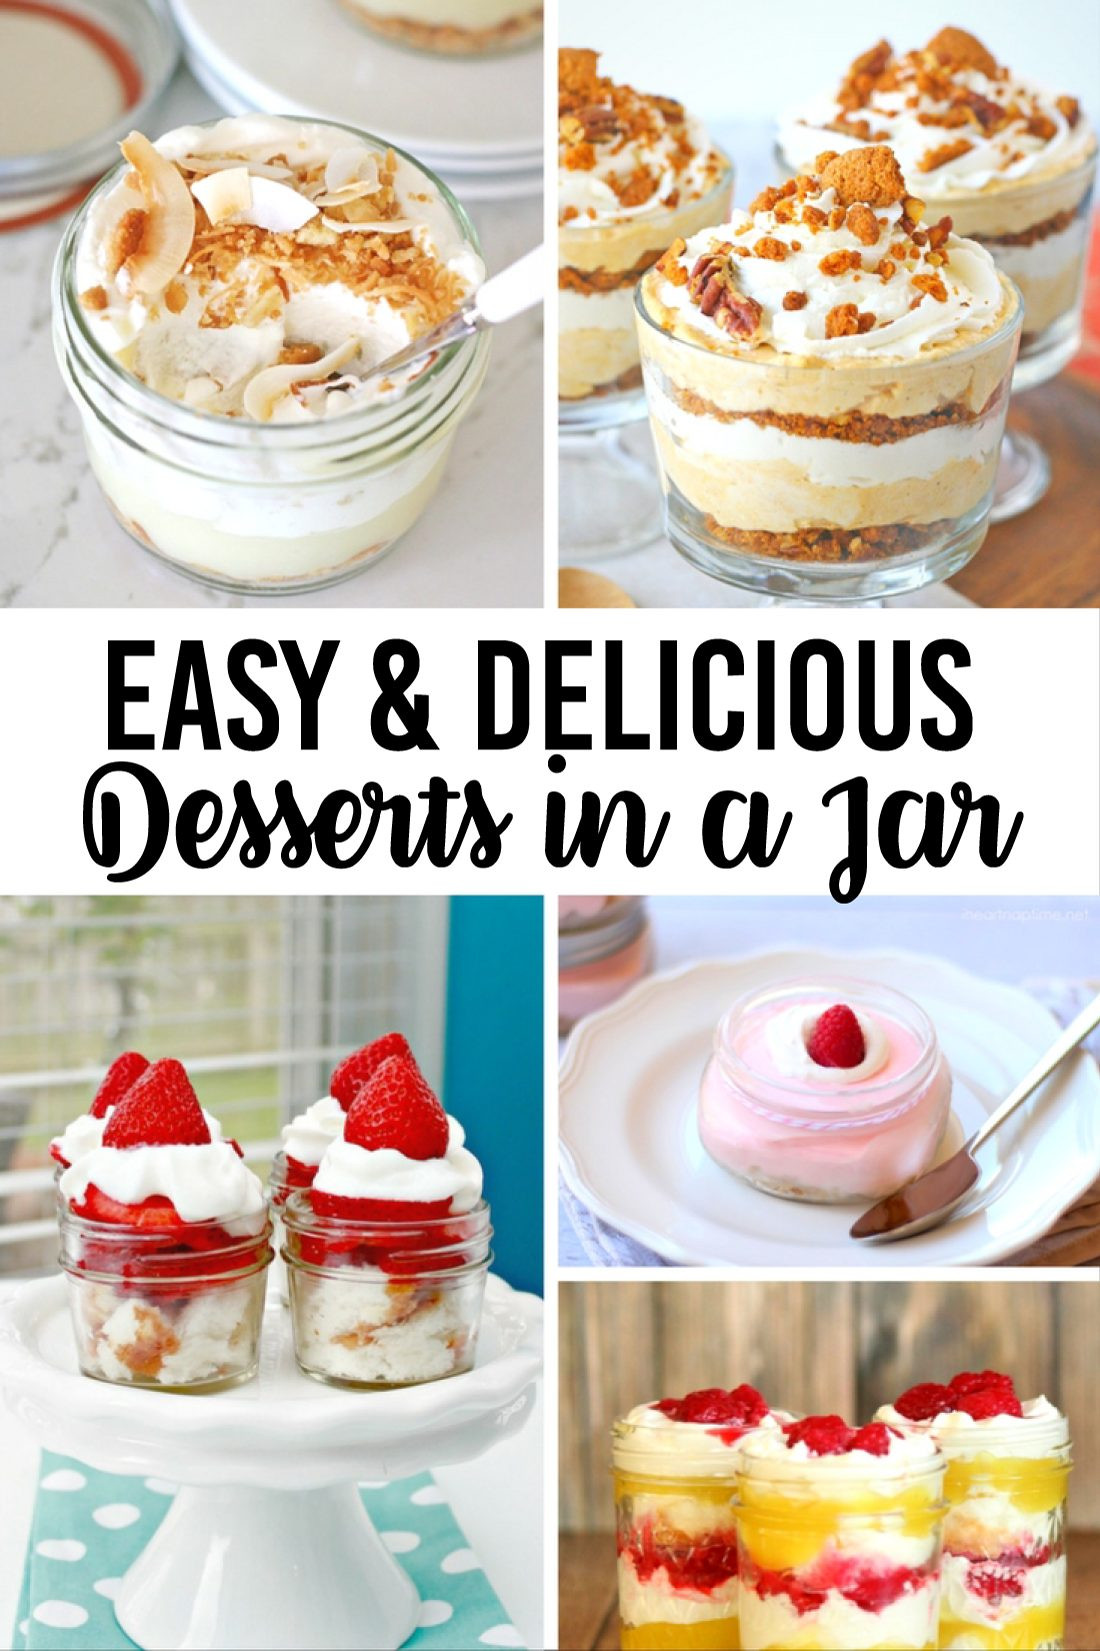 Pictures Of Desserts
 20 Easy and Delicious Desserts in a Jar